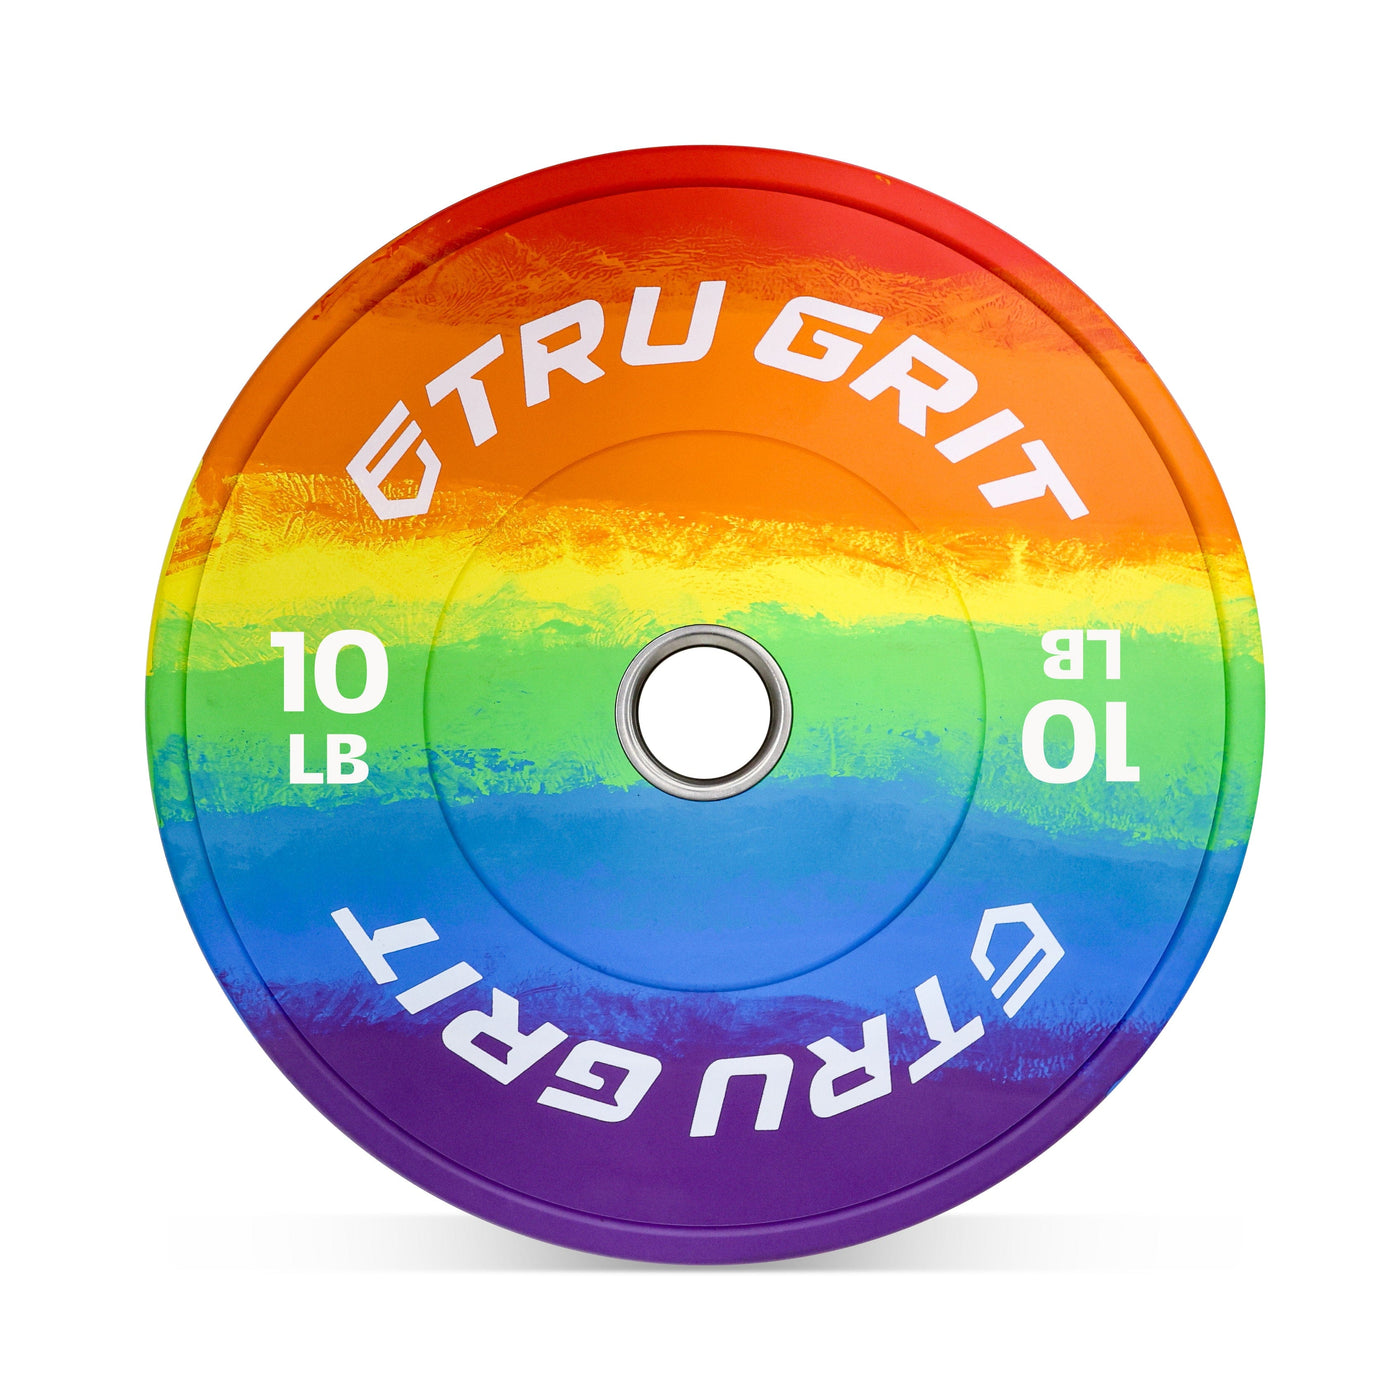 Spectrum Bumper Plates (Pairs) Limited Edition